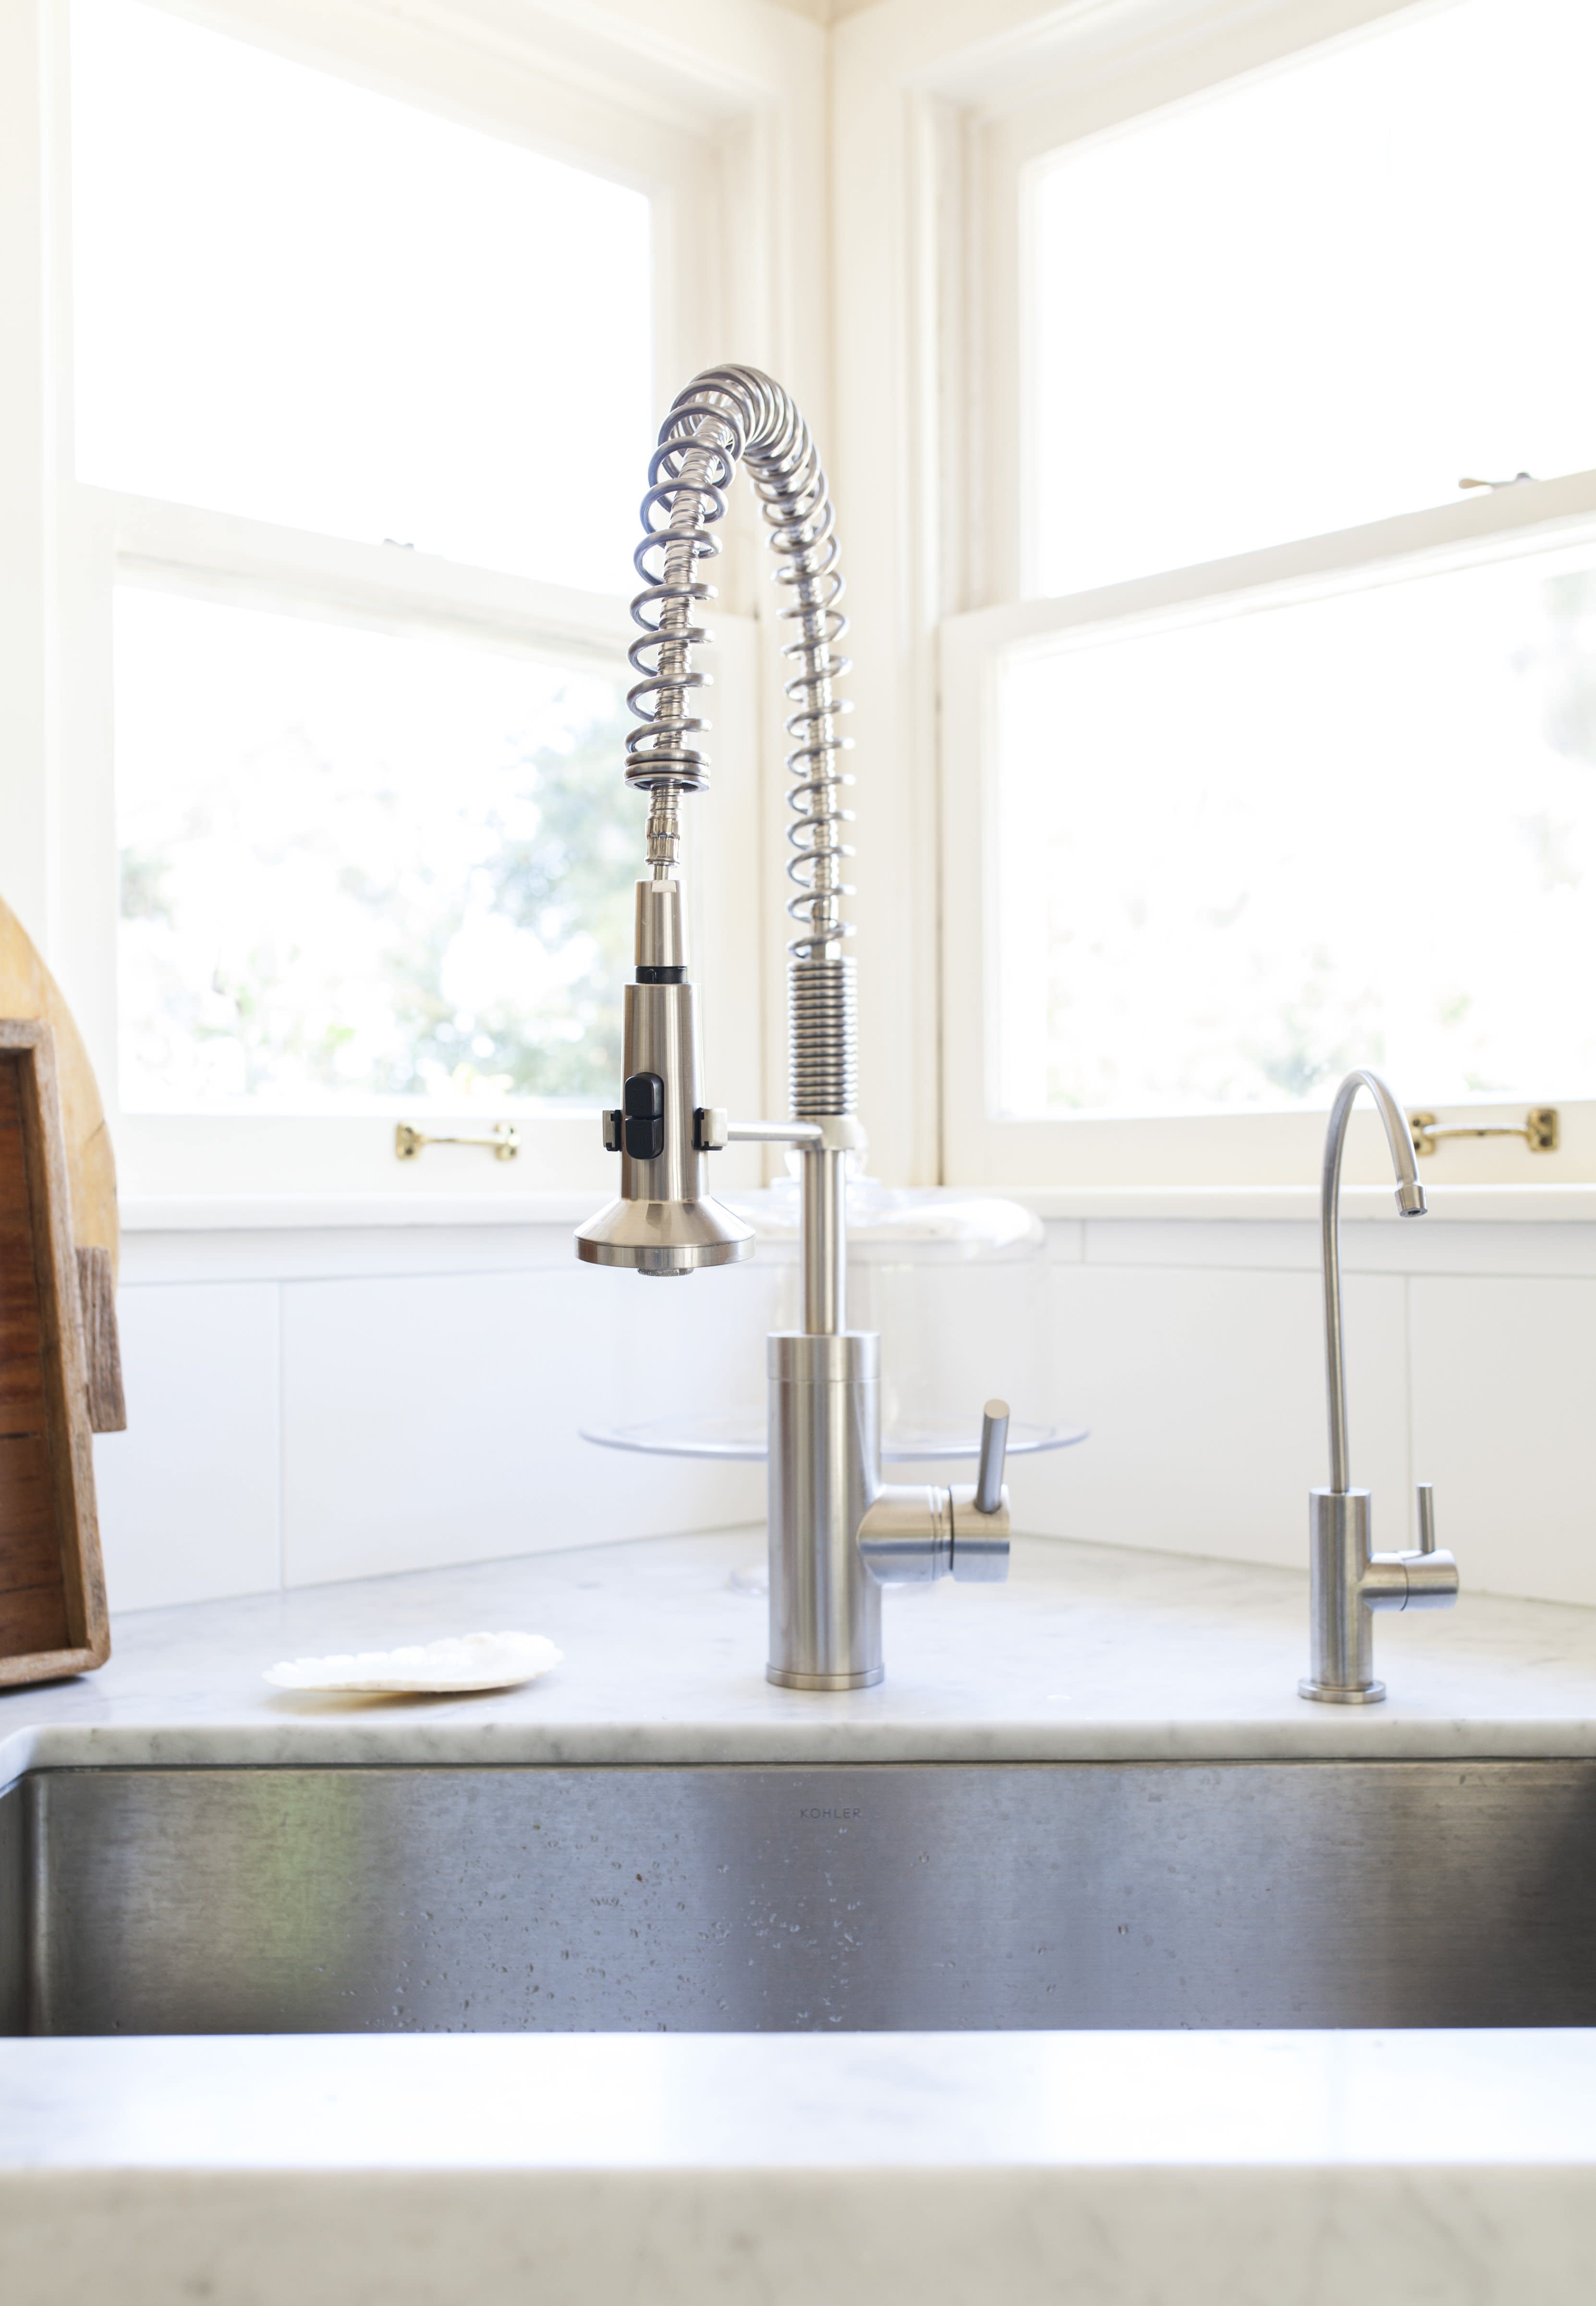 Eight Everyday Kitchen Surfaces to Clean and Disinfect